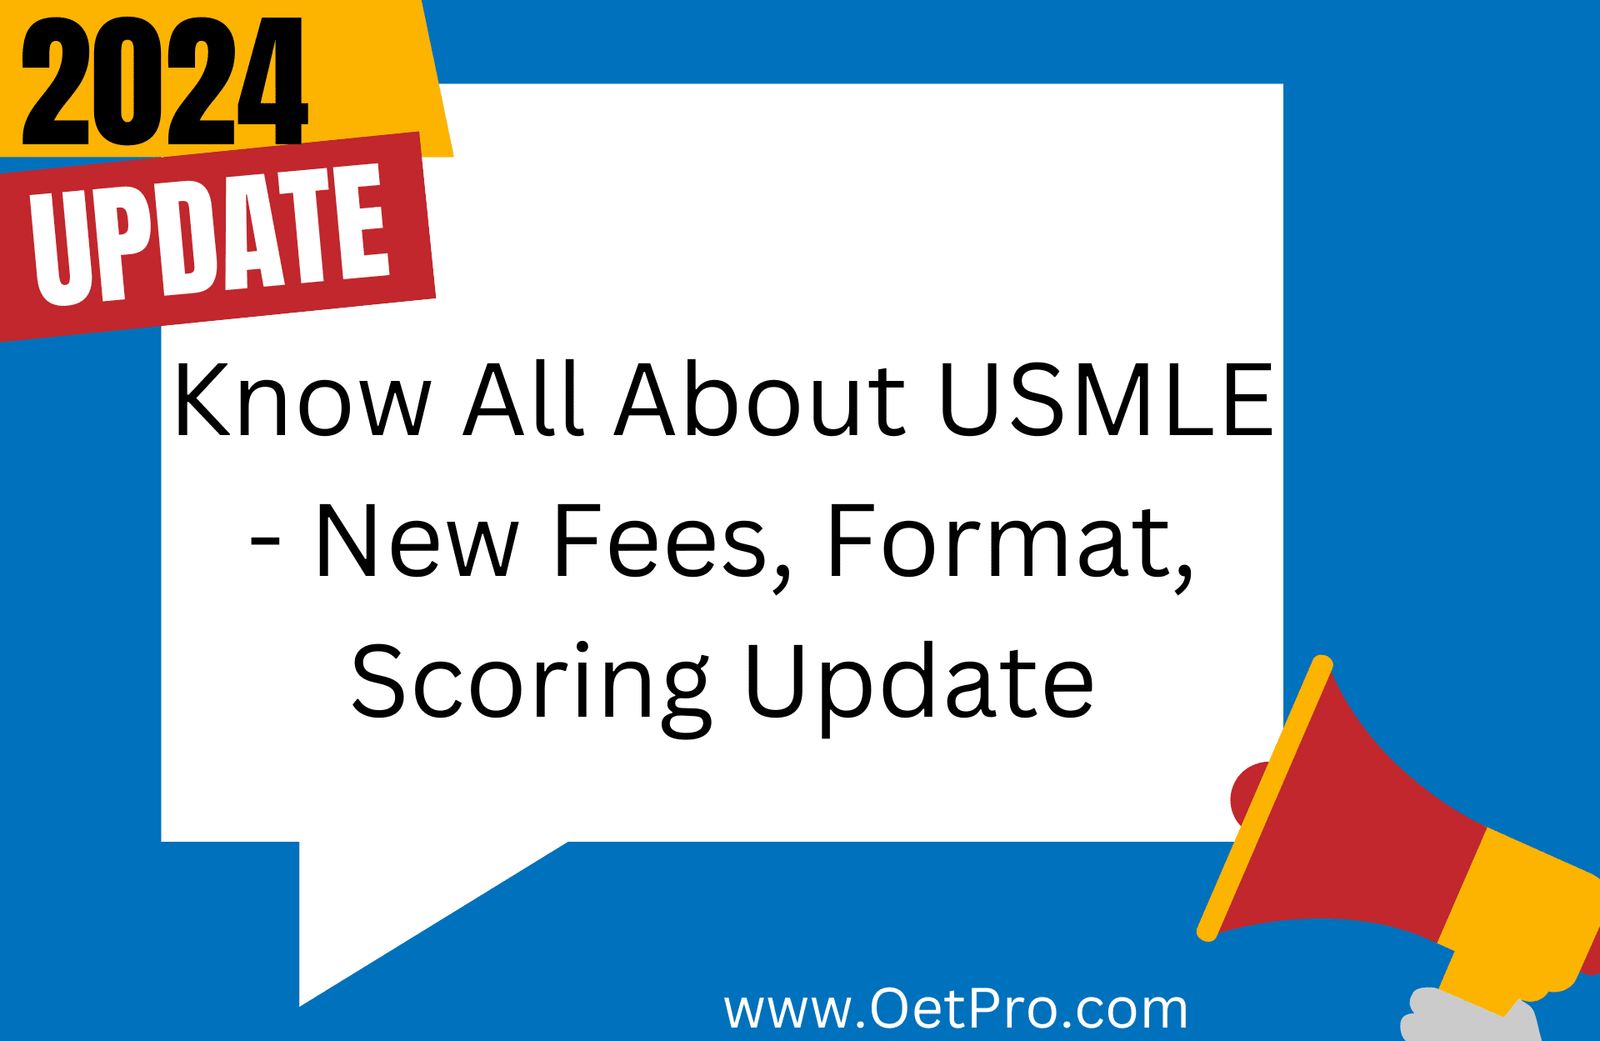 Know All About USMLE New Fees, Format, Scoring 2024 Update